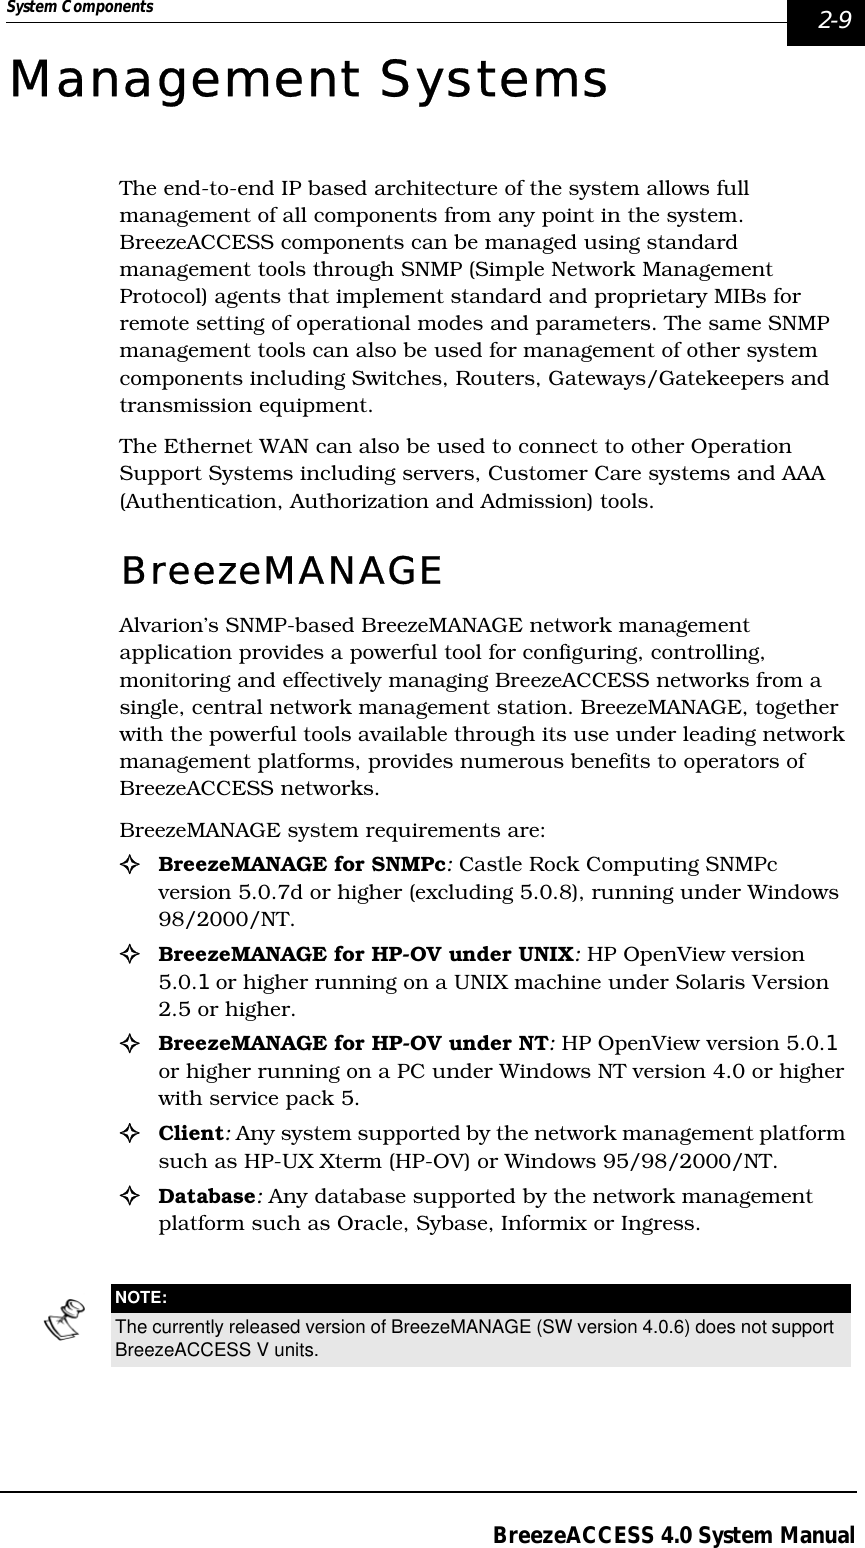 System Components  2-9BreezeACCESS 4.0 System ManualManagement SystemsThe end-to-end IP based architecture of the system allows full management of all components from any point in the system. BreezeACCESS components can be managed using standard management tools through SNMP (Simple Network Management Protocol) agents that implement standard and proprietary MIBs for remote setting of operational modes and parameters. The same SNMP management tools can also be used for management of other system components including Switches, Routers, Gateways/Gatekeepers and transmission equipment.The Ethernet WAN can also be used to connect to other Operation Support Systems including servers, Customer Care systems and AAA (Authentication, Authorization and Admission) tools.BreezeMANAGE Alvarion’s SNMP-based BreezeMANAGE network management application provides a powerful tool for configuring, controlling, monitoring and effectively managing BreezeACCESS networks from a single, central network management station. BreezeMANAGE, together with the powerful tools available through its use under leading network management platforms, provides numerous benefits to operators of BreezeACCESS networks.BreezeMANAGE system requirements are:!BreezeMANAGE for SNMPc: Castle Rock Computing SNMPc version 5.0.7d or higher (excluding 5.0.8), running under Windows 98/2000/NT.!BreezeMANAGE for HP-OV under UNIX: HP OpenView version 5.0.1 or higher running on a UNIX machine under Solaris Version 2.5 or higher.!BreezeMANAGE for HP-OV under NT: HP OpenView version 5.0.1 or higher running on a PC under Windows NT version 4.0 or higher with service pack 5.!Client: Any system supported by the network management platform such as HP-UX Xterm (HP-OV) or Windows 95/98/2000/NT. !Database: Any database supported by the network management platform such as Oracle, Sybase, Informix or Ingress.NOTE:The currently released version of BreezeMANAGE (SW version 4.0.6) does not support BreezeACCESS V units.